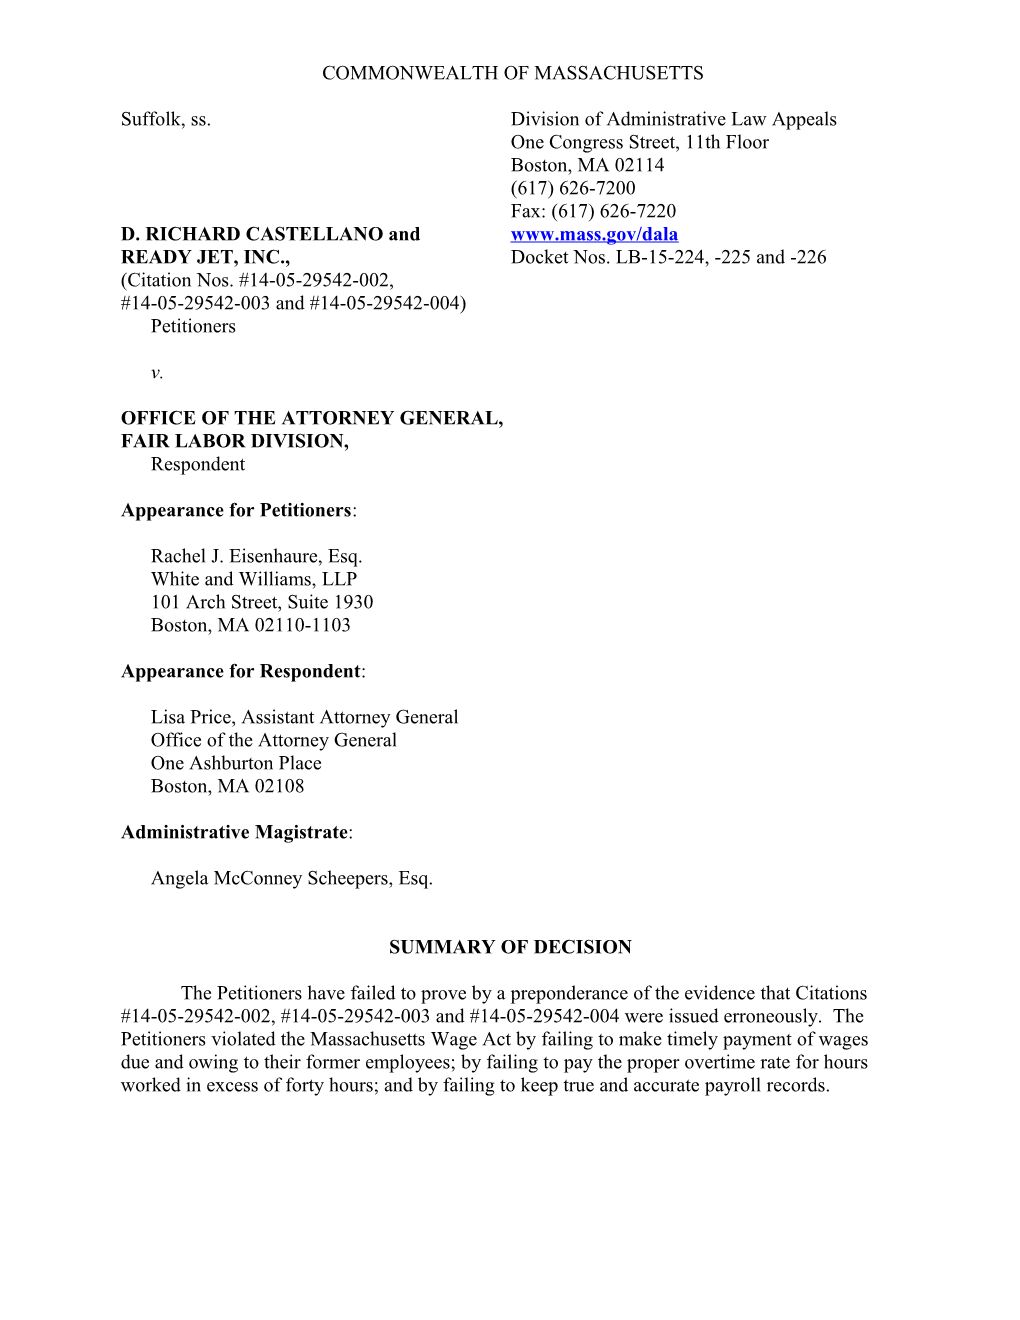 Castellano and Ready Jet, Inc. V. OAG-FLDLB-15-224, -225 and -226